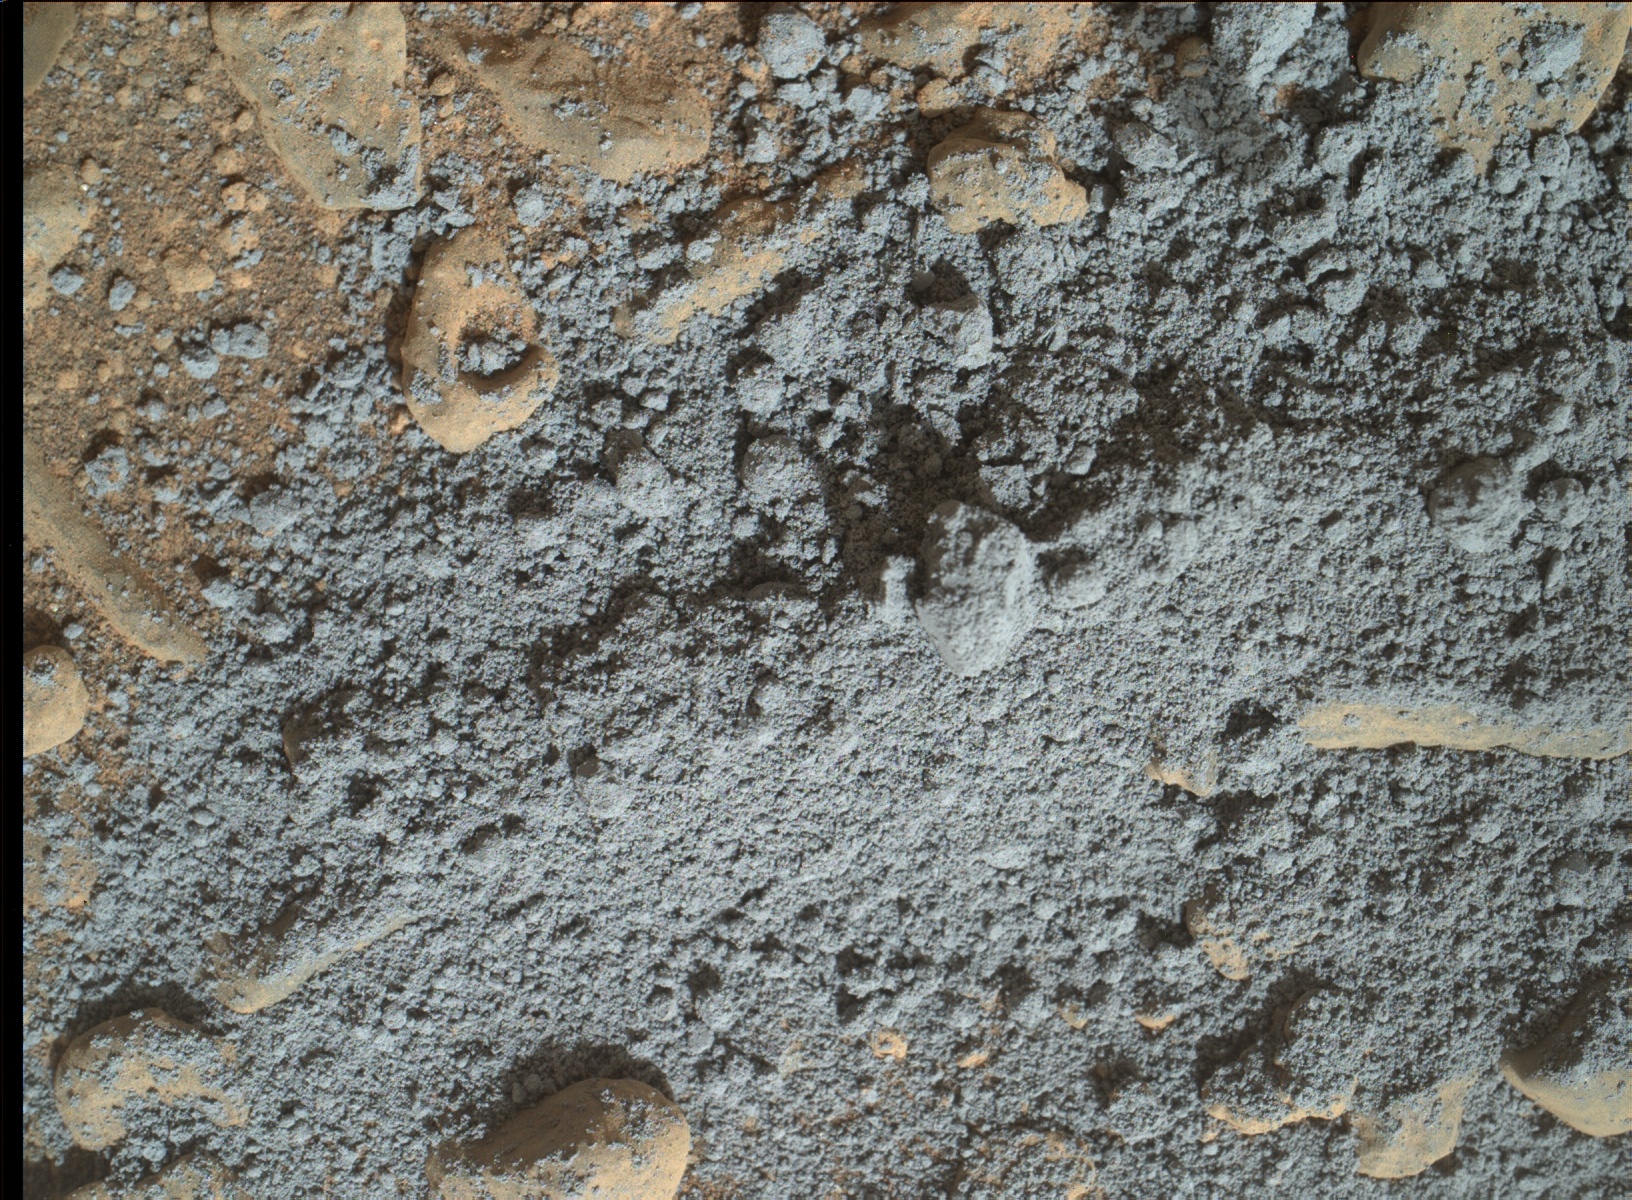 Nasa's Mars rover Curiosity acquired this image using its Mars Hand Lens Imager (MAHLI) on Sol 954